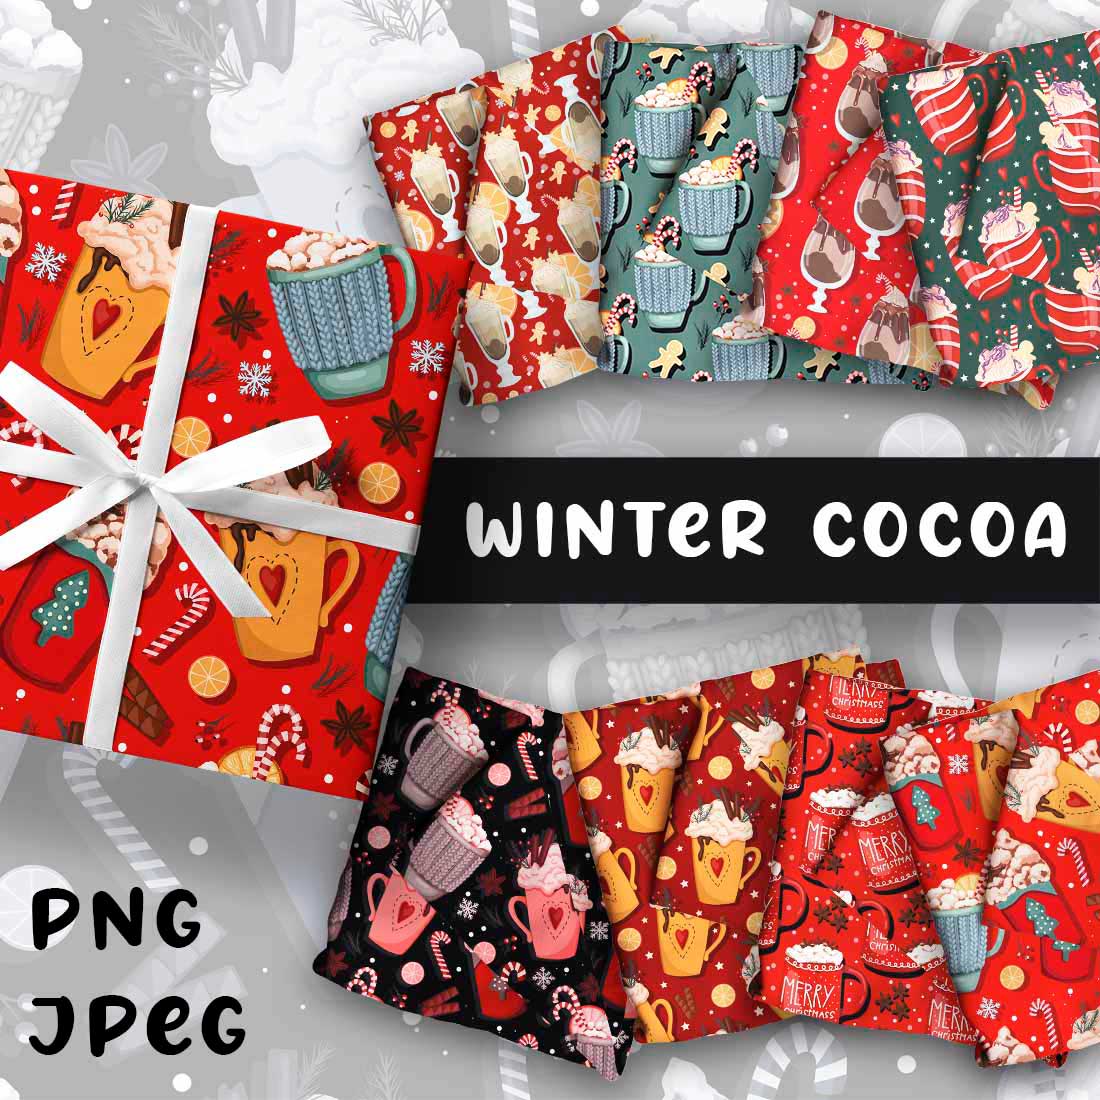 Collection of images of amazing patterns with winter cocoa.